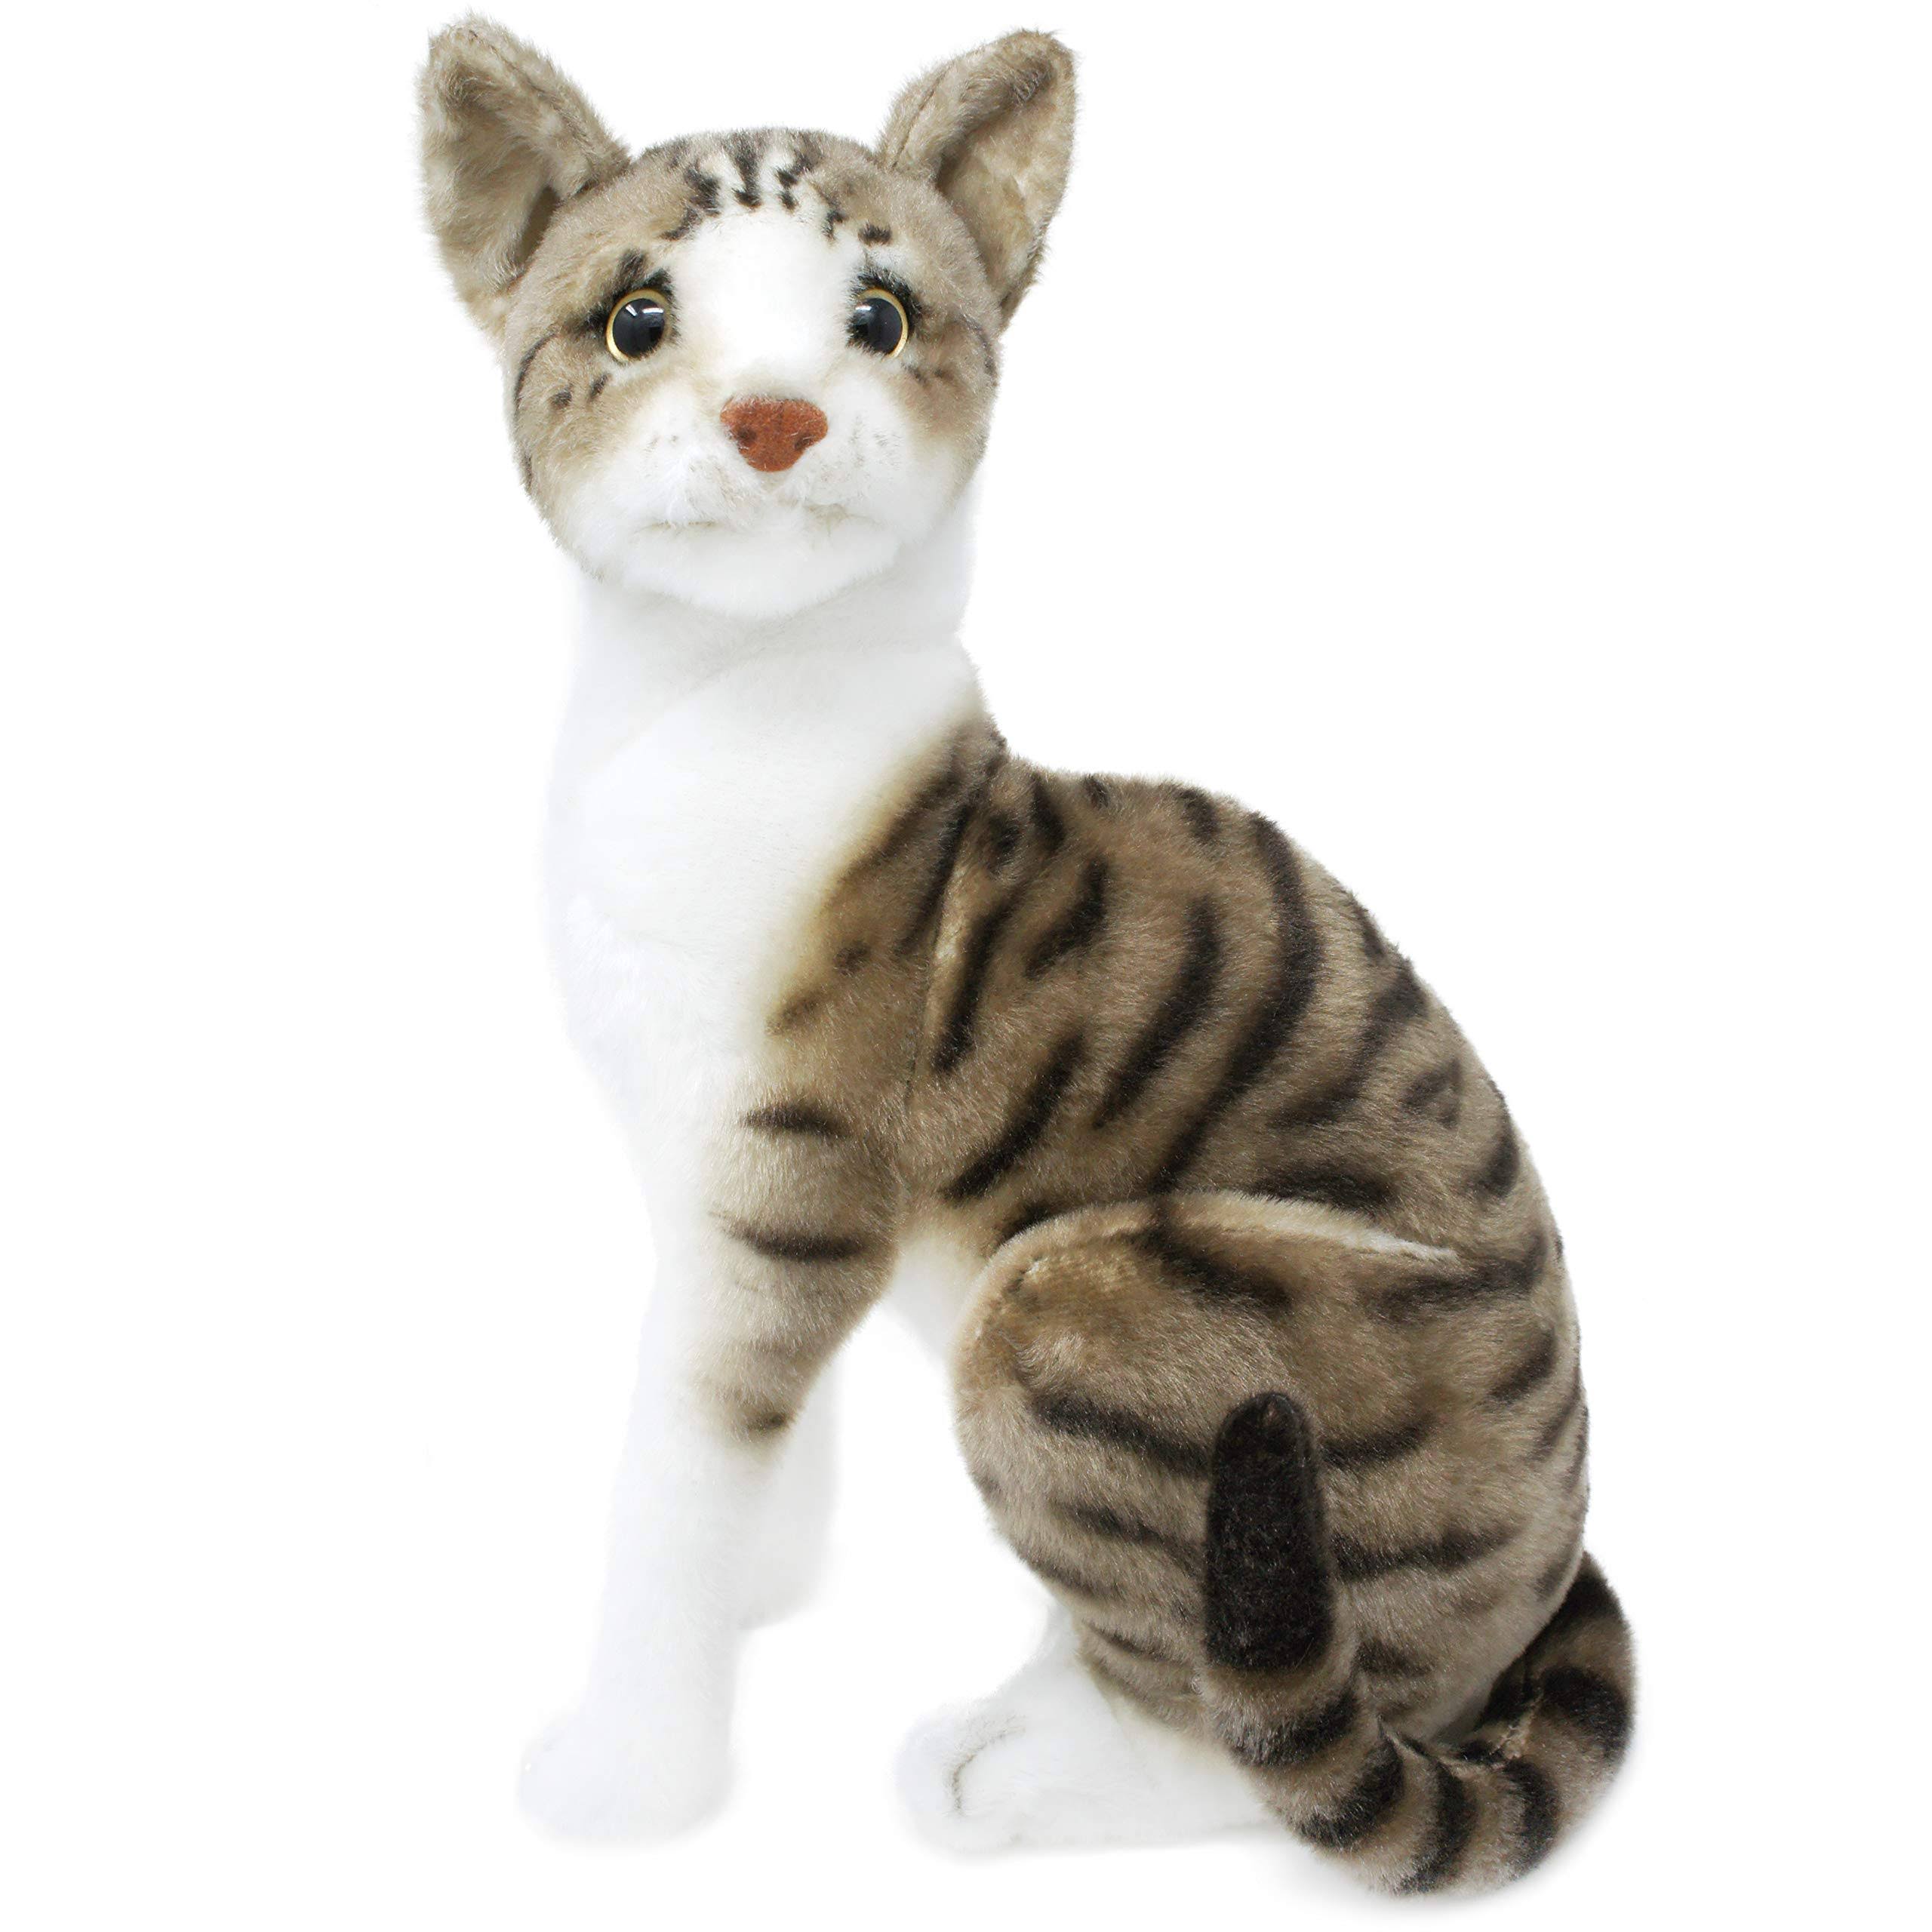 VIAHART Amy The American Shorthair Cat - 14 Inch Stuffed Animal Plush - by Tiger Tale Toys